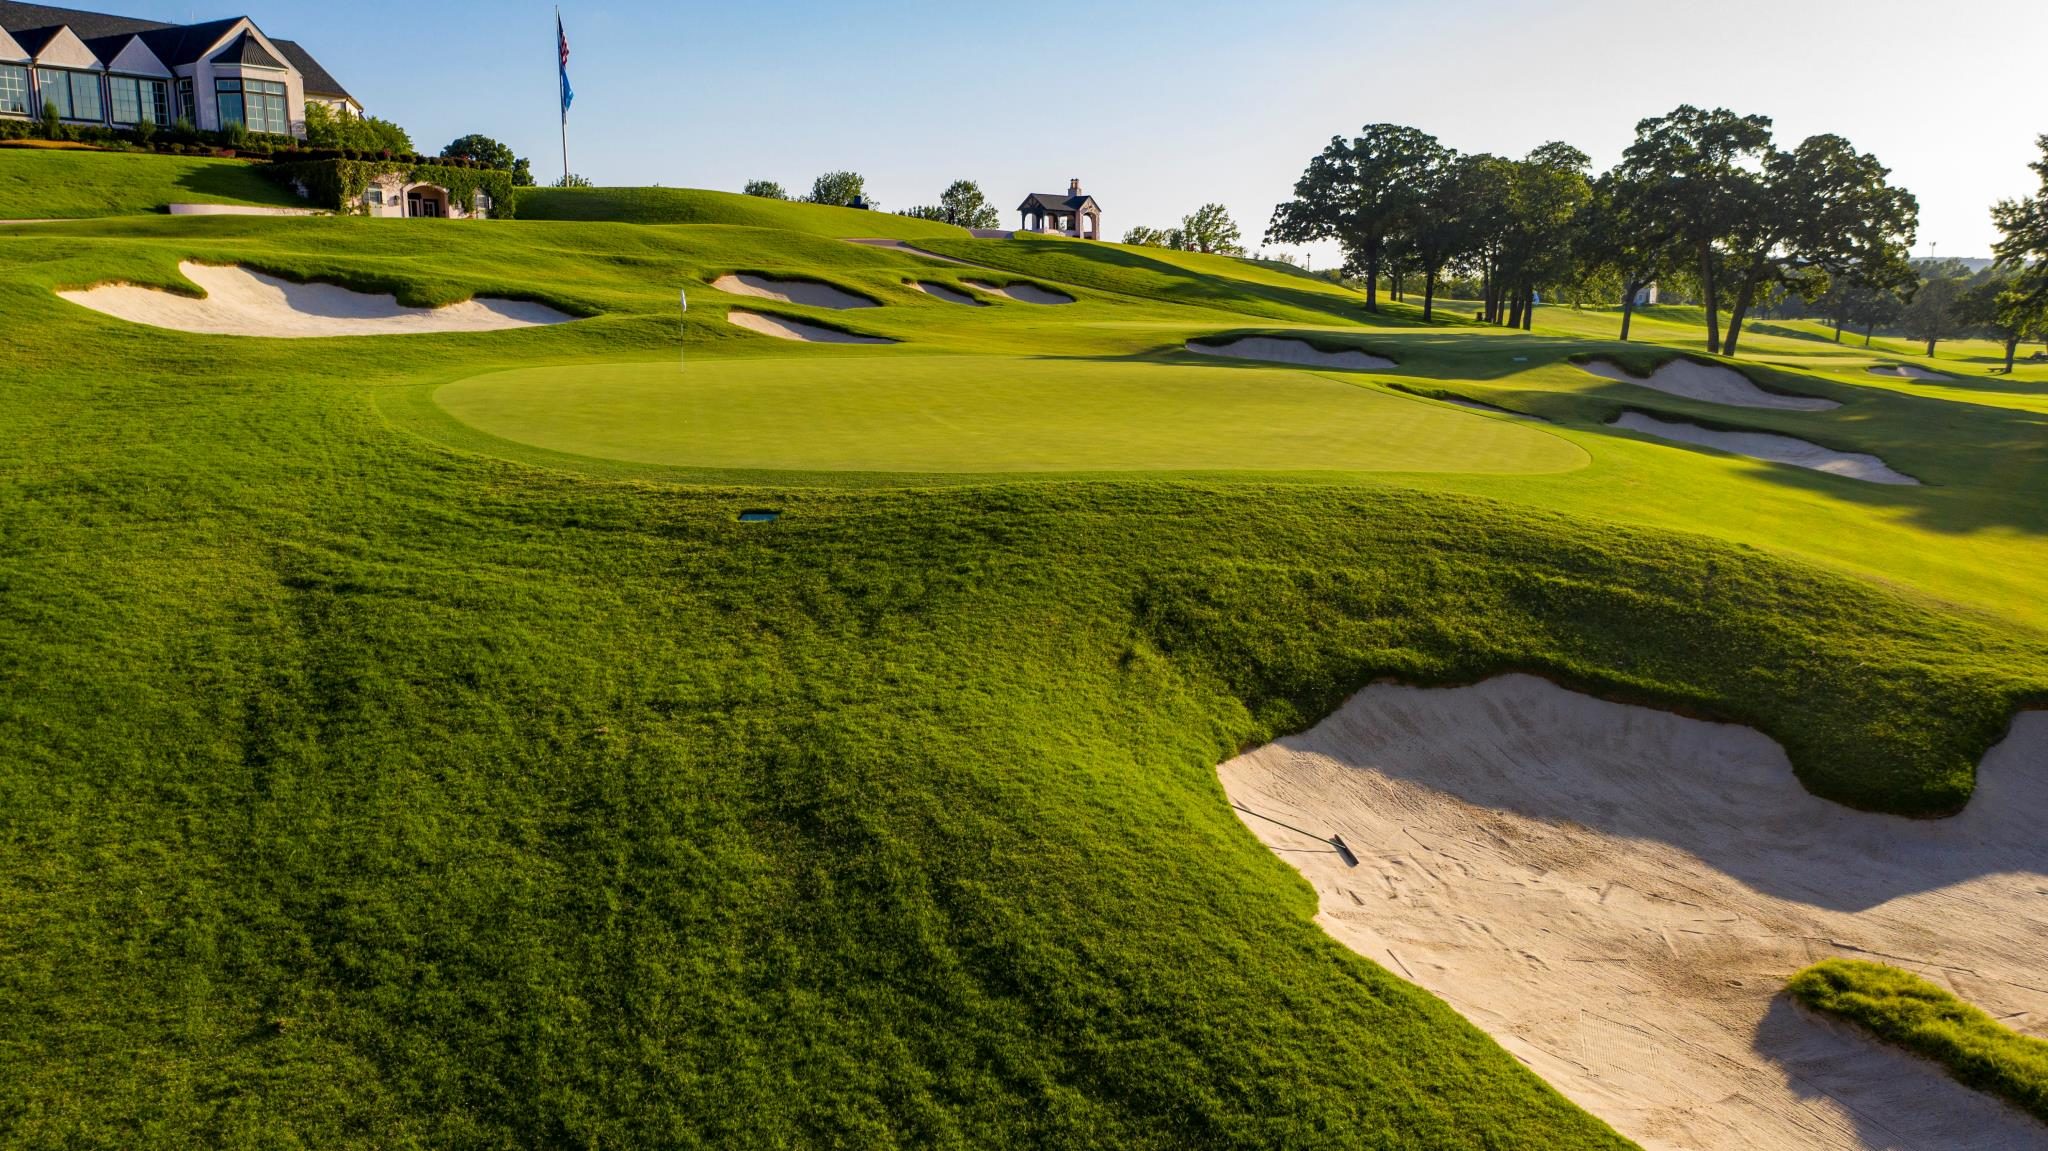 Southern Hills replaces Trump’s Bedminster for 2022 PGA